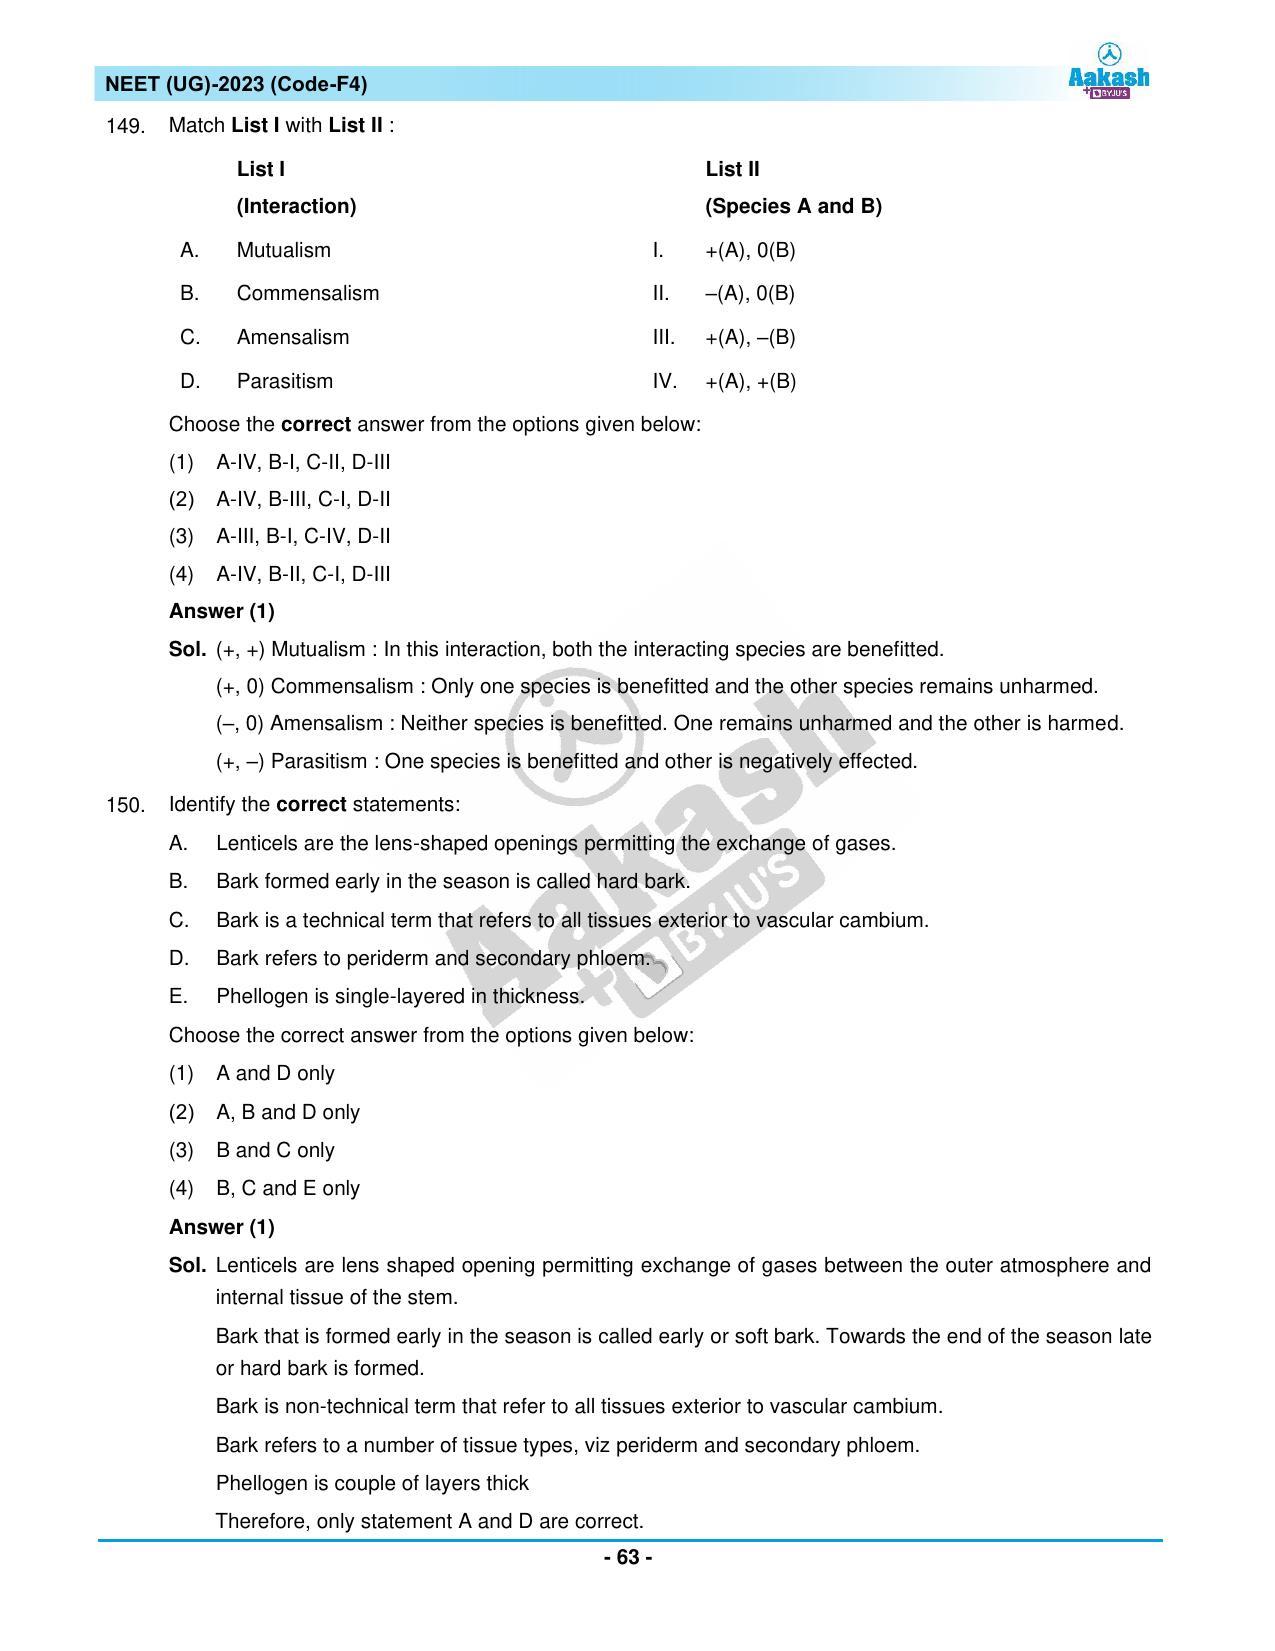 NEET 2023 Question Paper F4 - Page 63